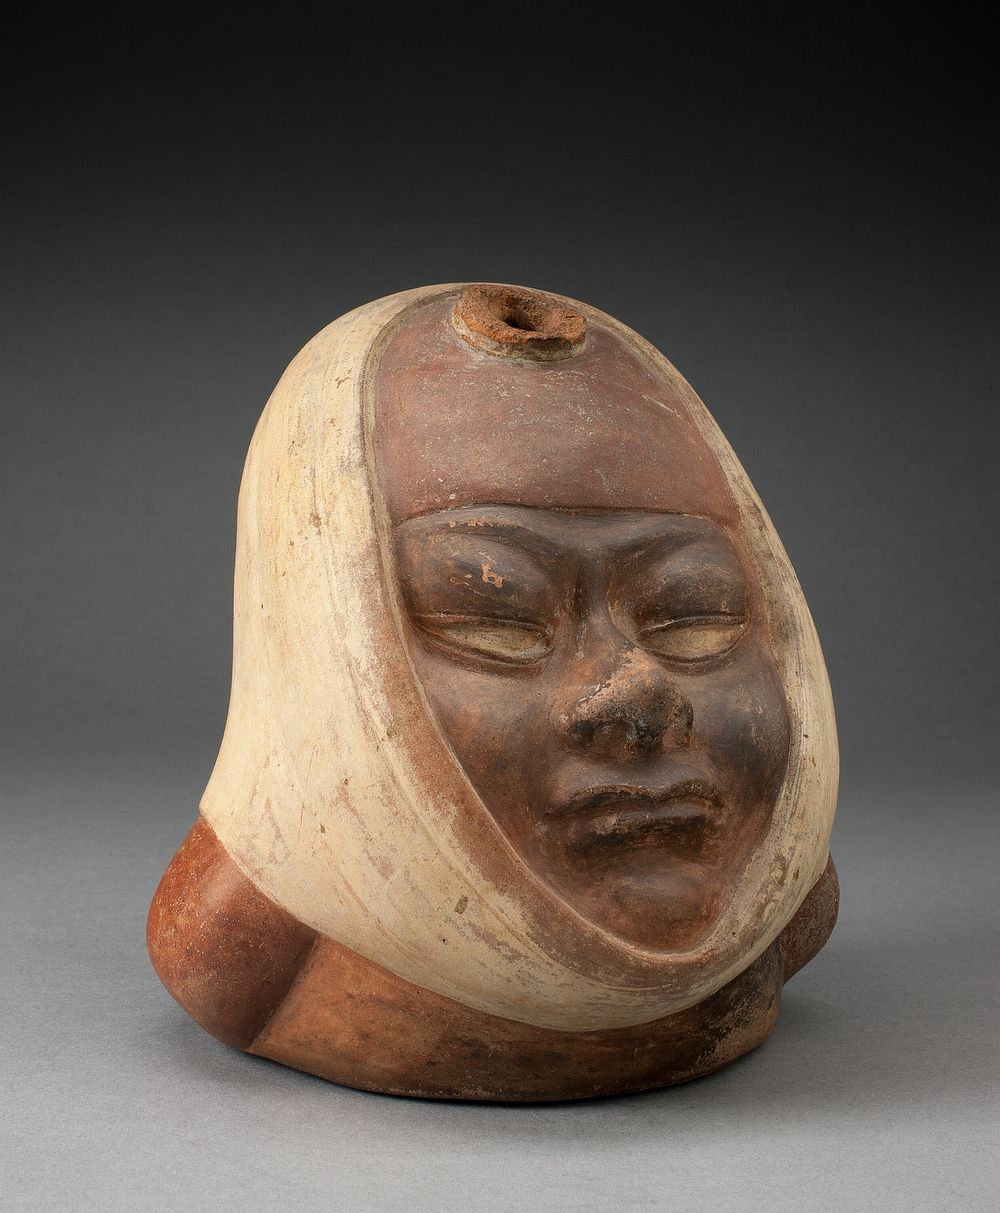 Stirrup Spout Vessel with Missing Handle in the Form of a Head Wraped in Textile by Moche